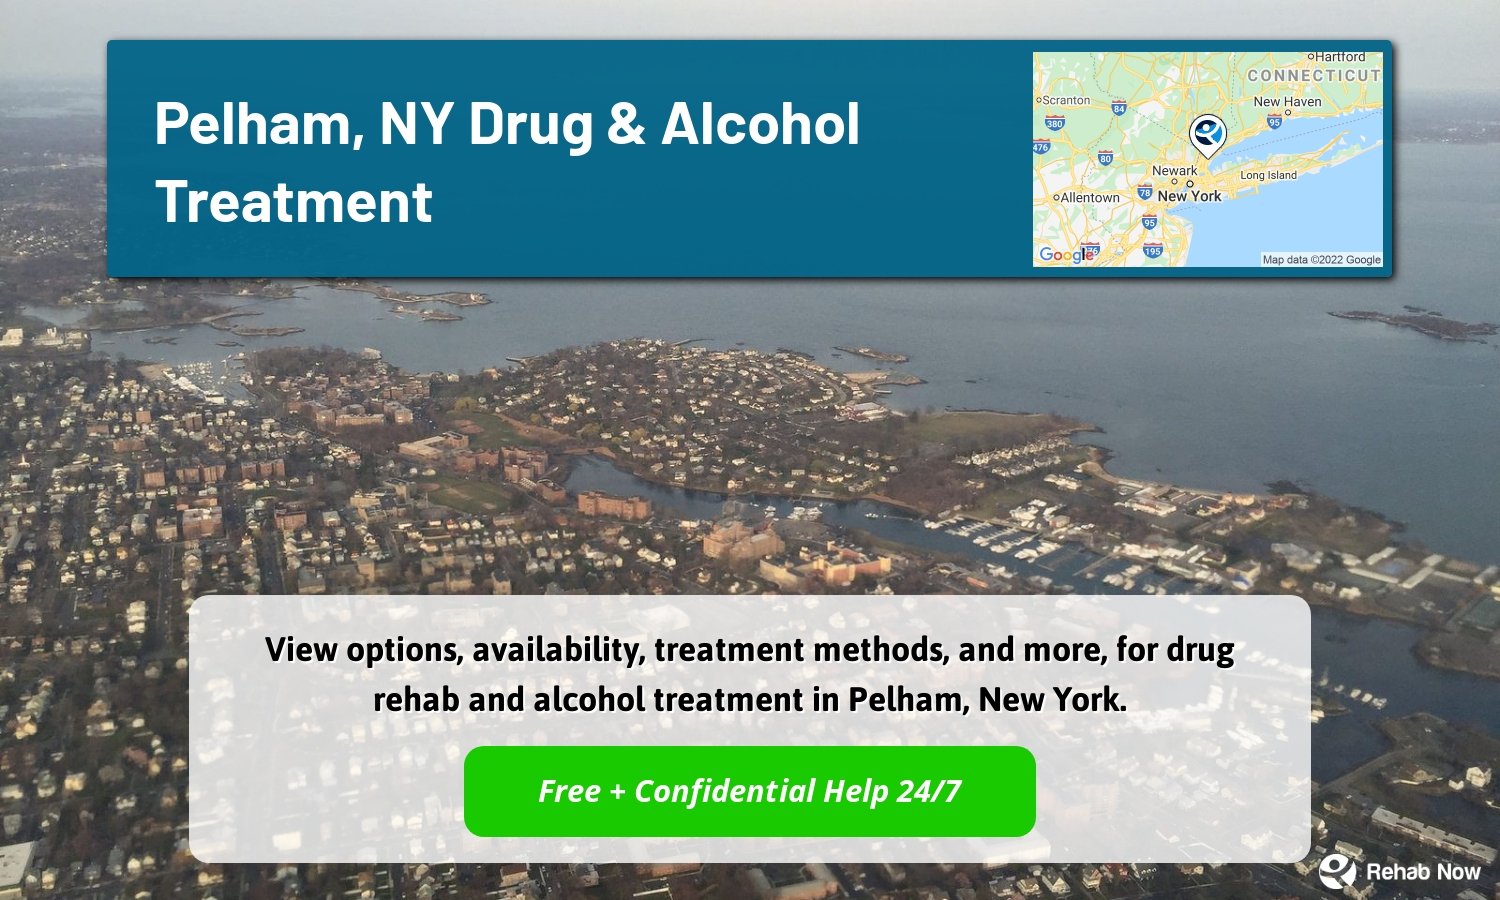 View options, availability, treatment methods, and more, for drug rehab and alcohol treatment in Pelham, New York.